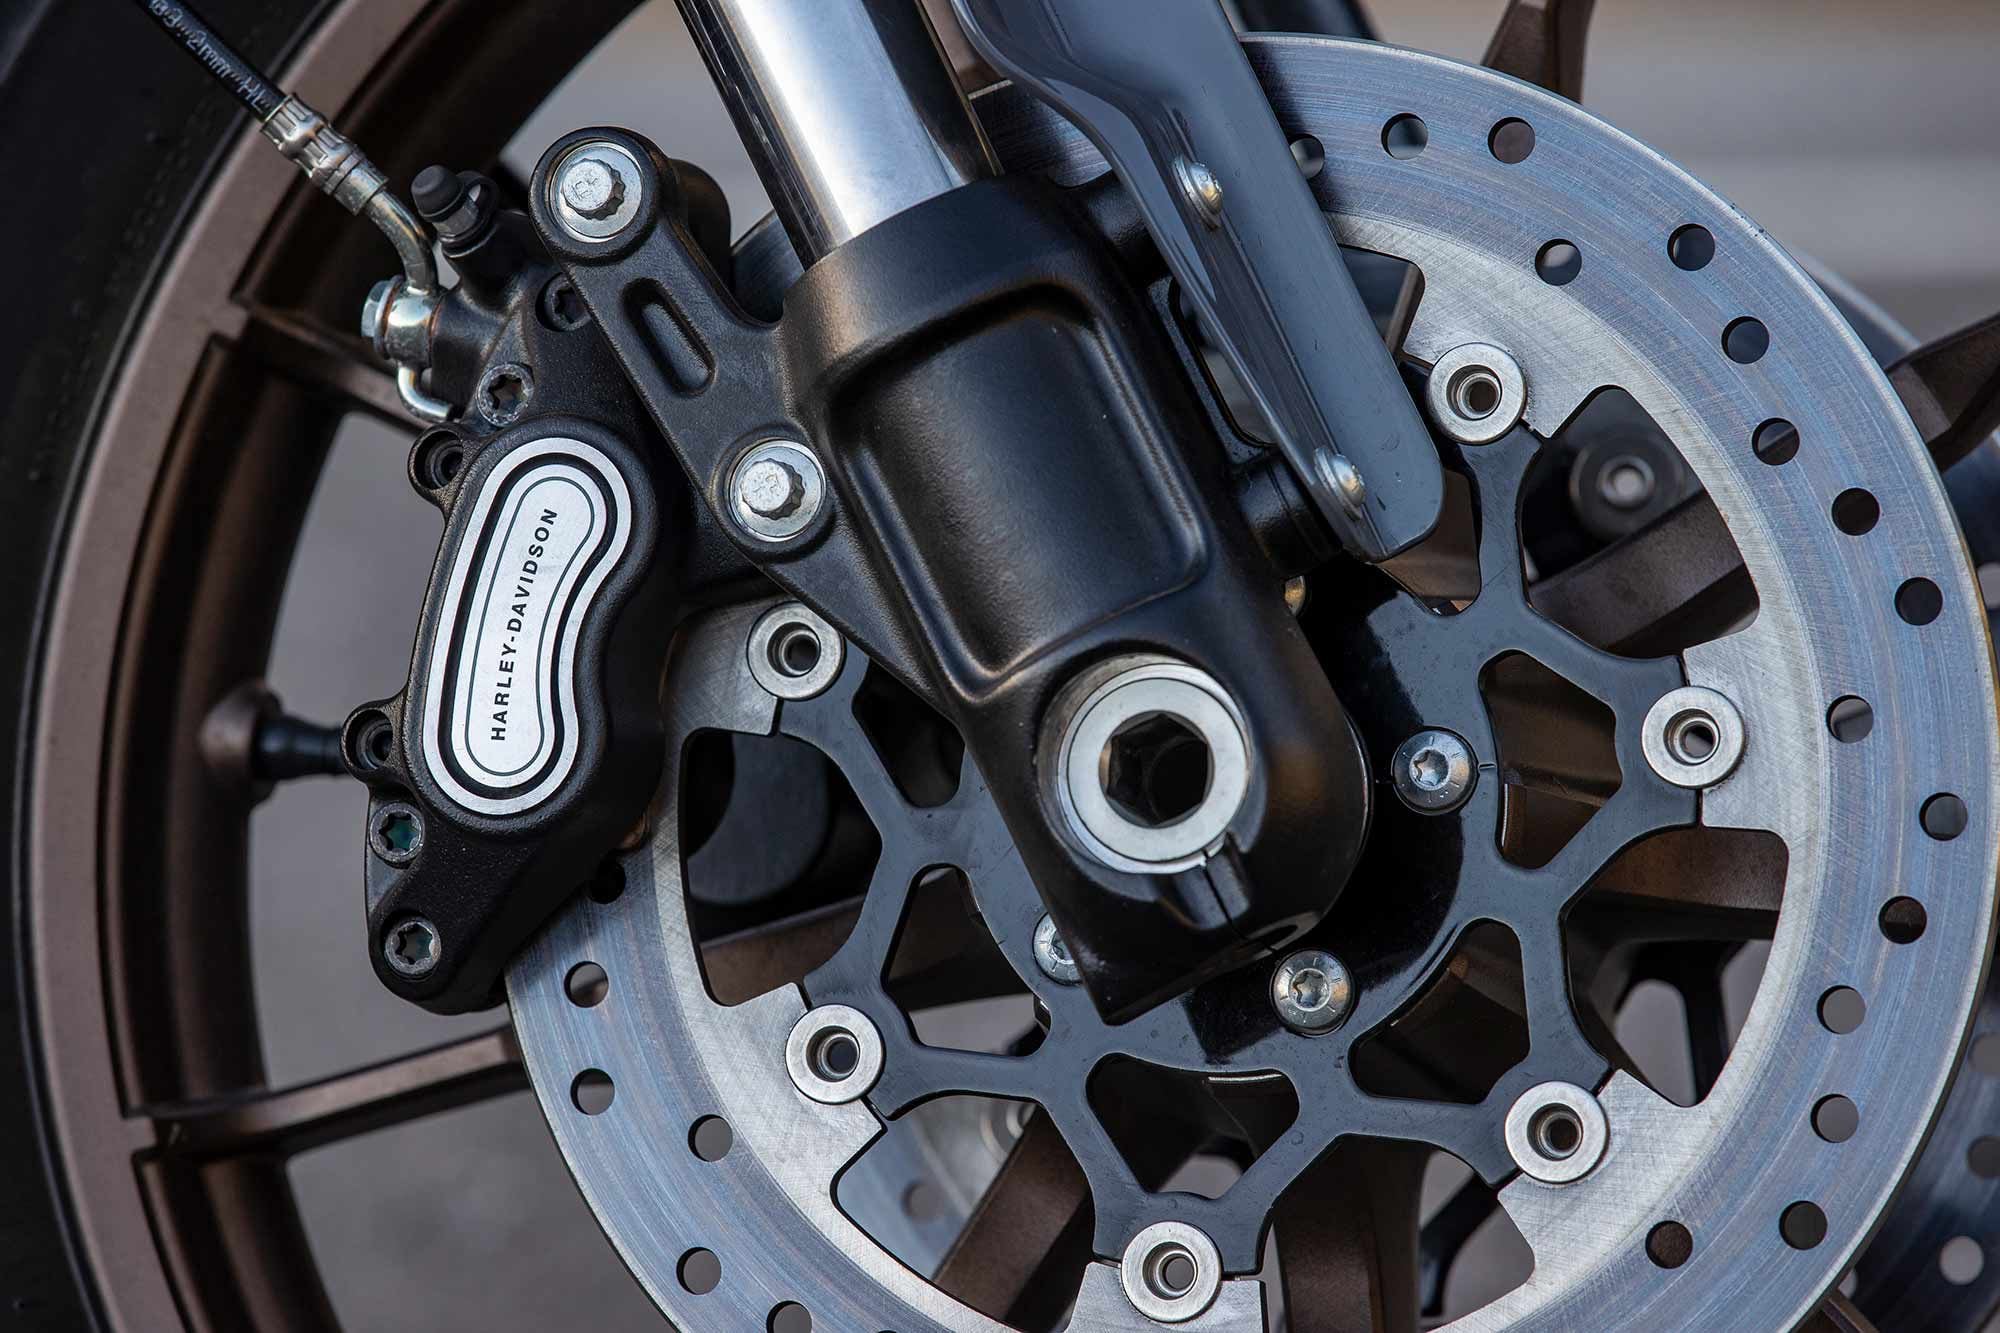 The braking equipment is no different from the previous Low Rider S model, with dual four-piston calipers on 300mm discs.